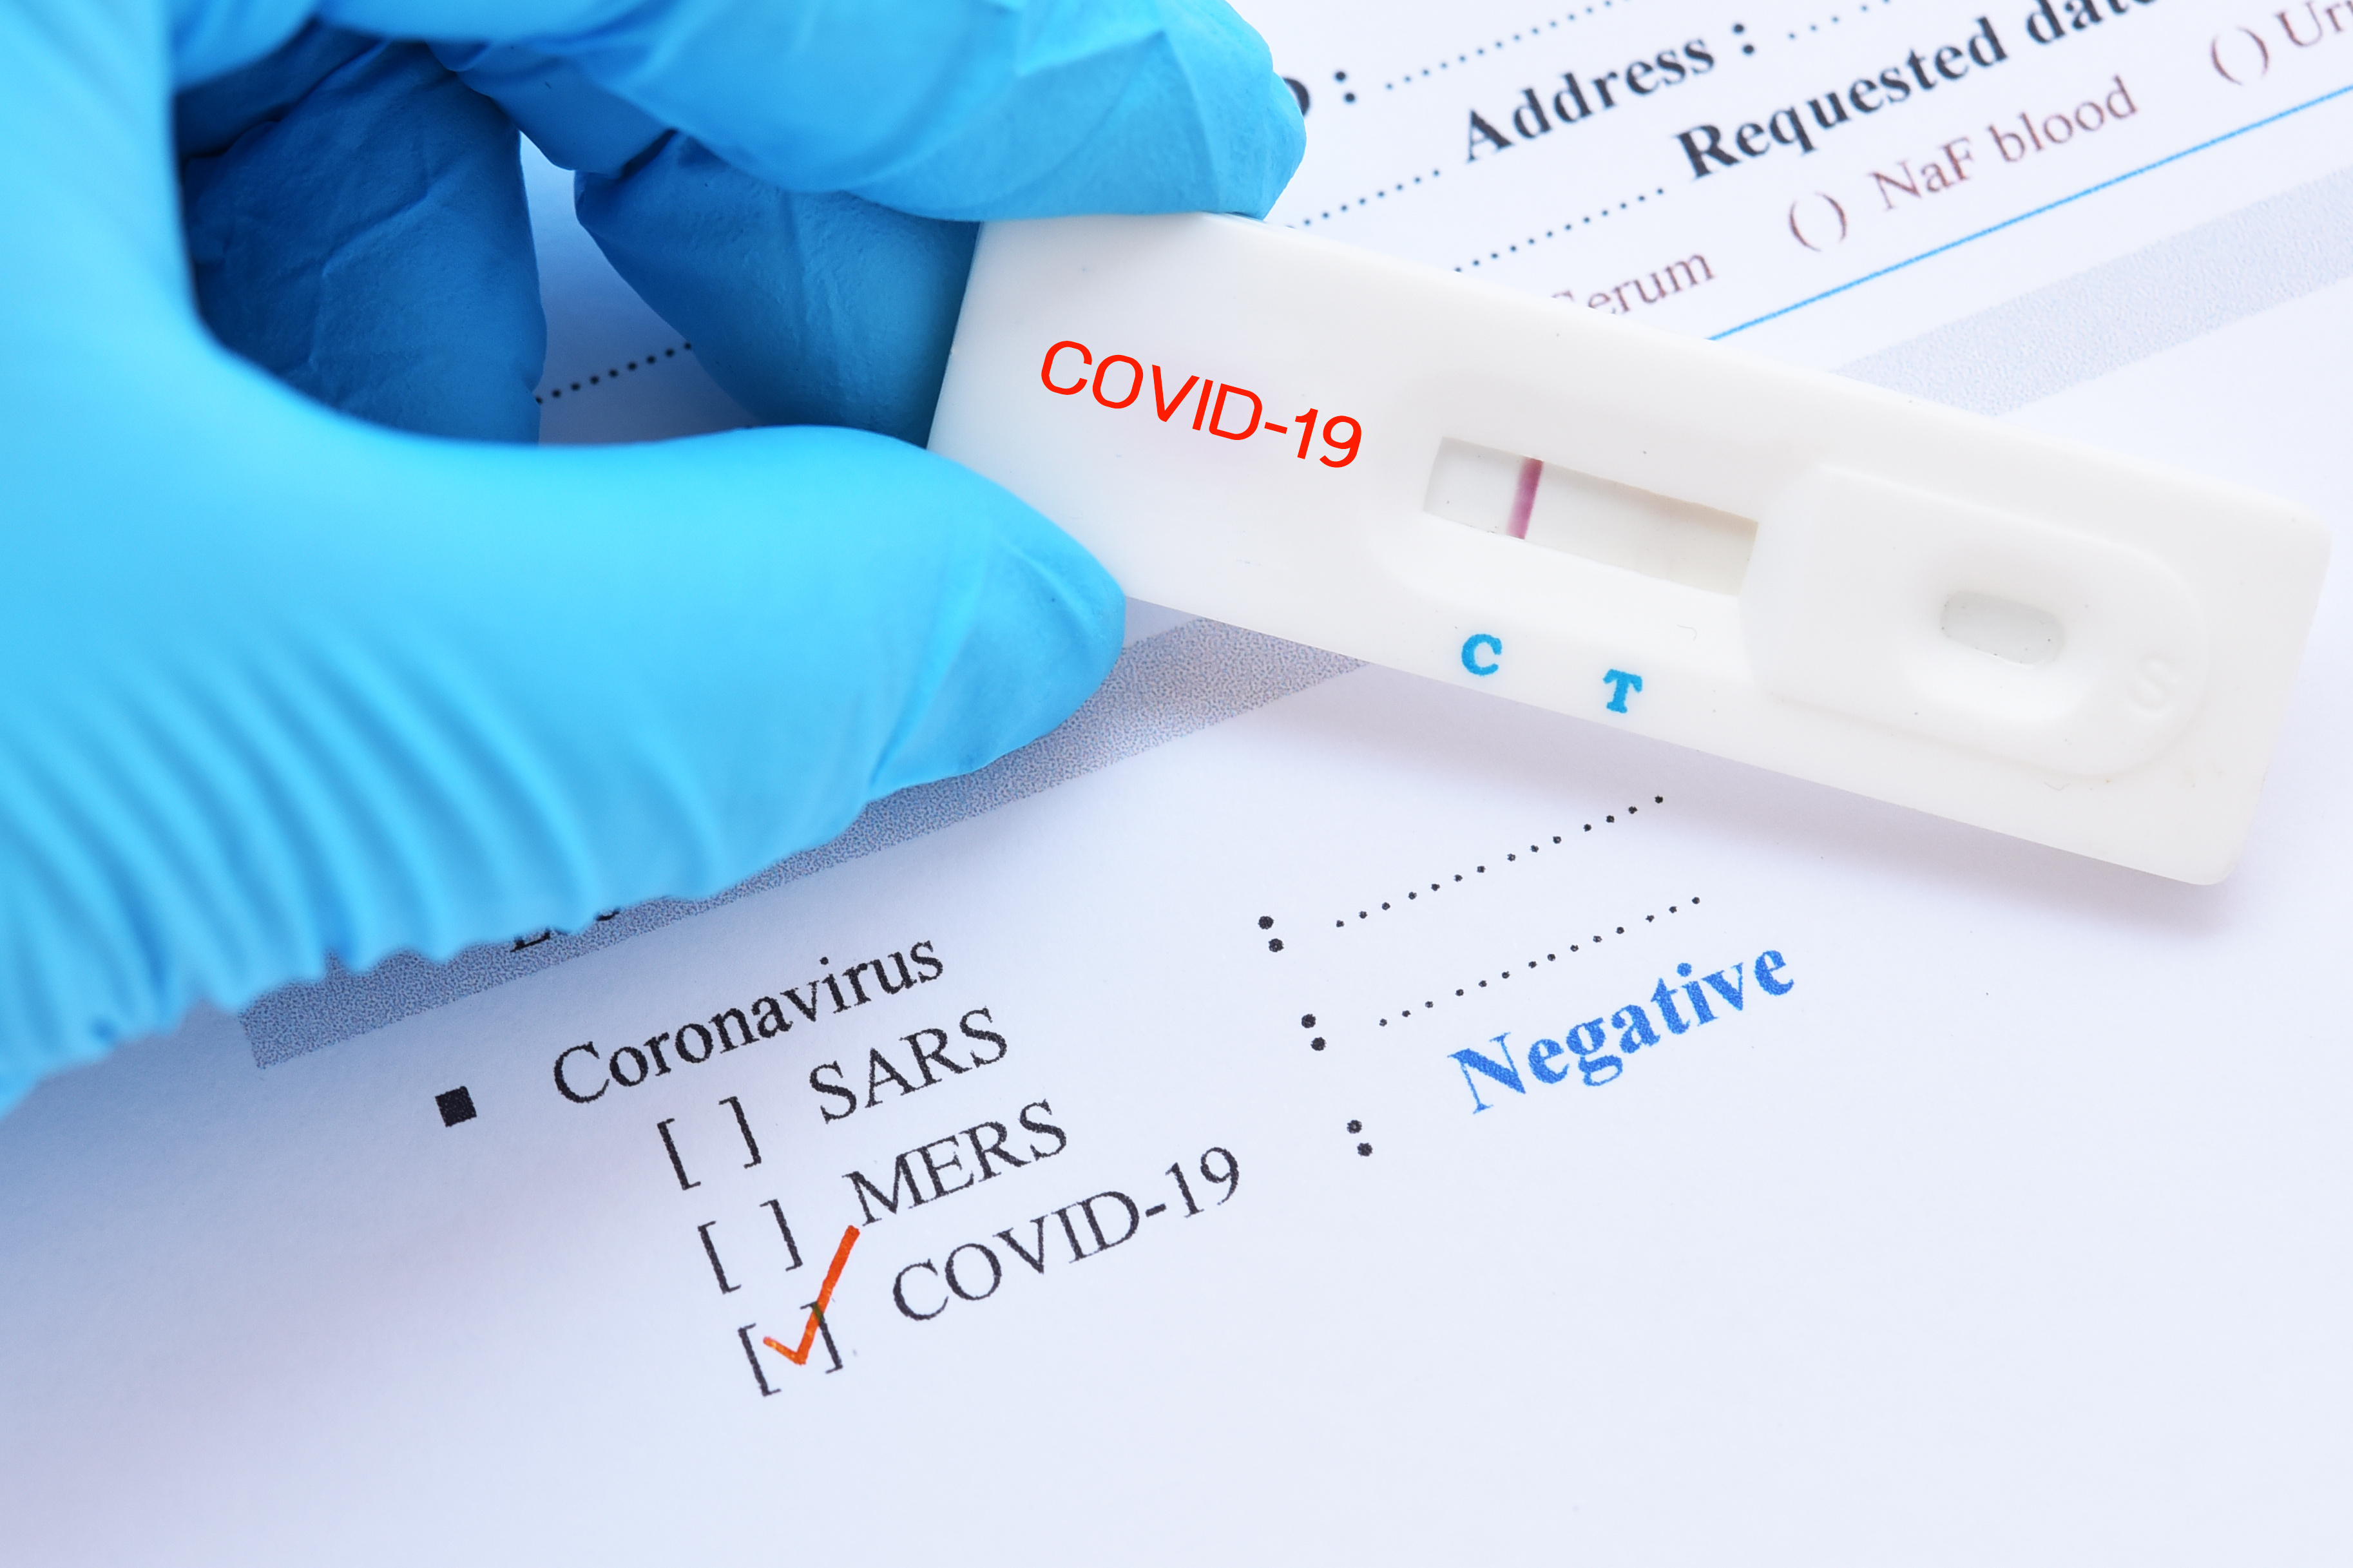 Negative test result by using rapid test device for COVID-19, no